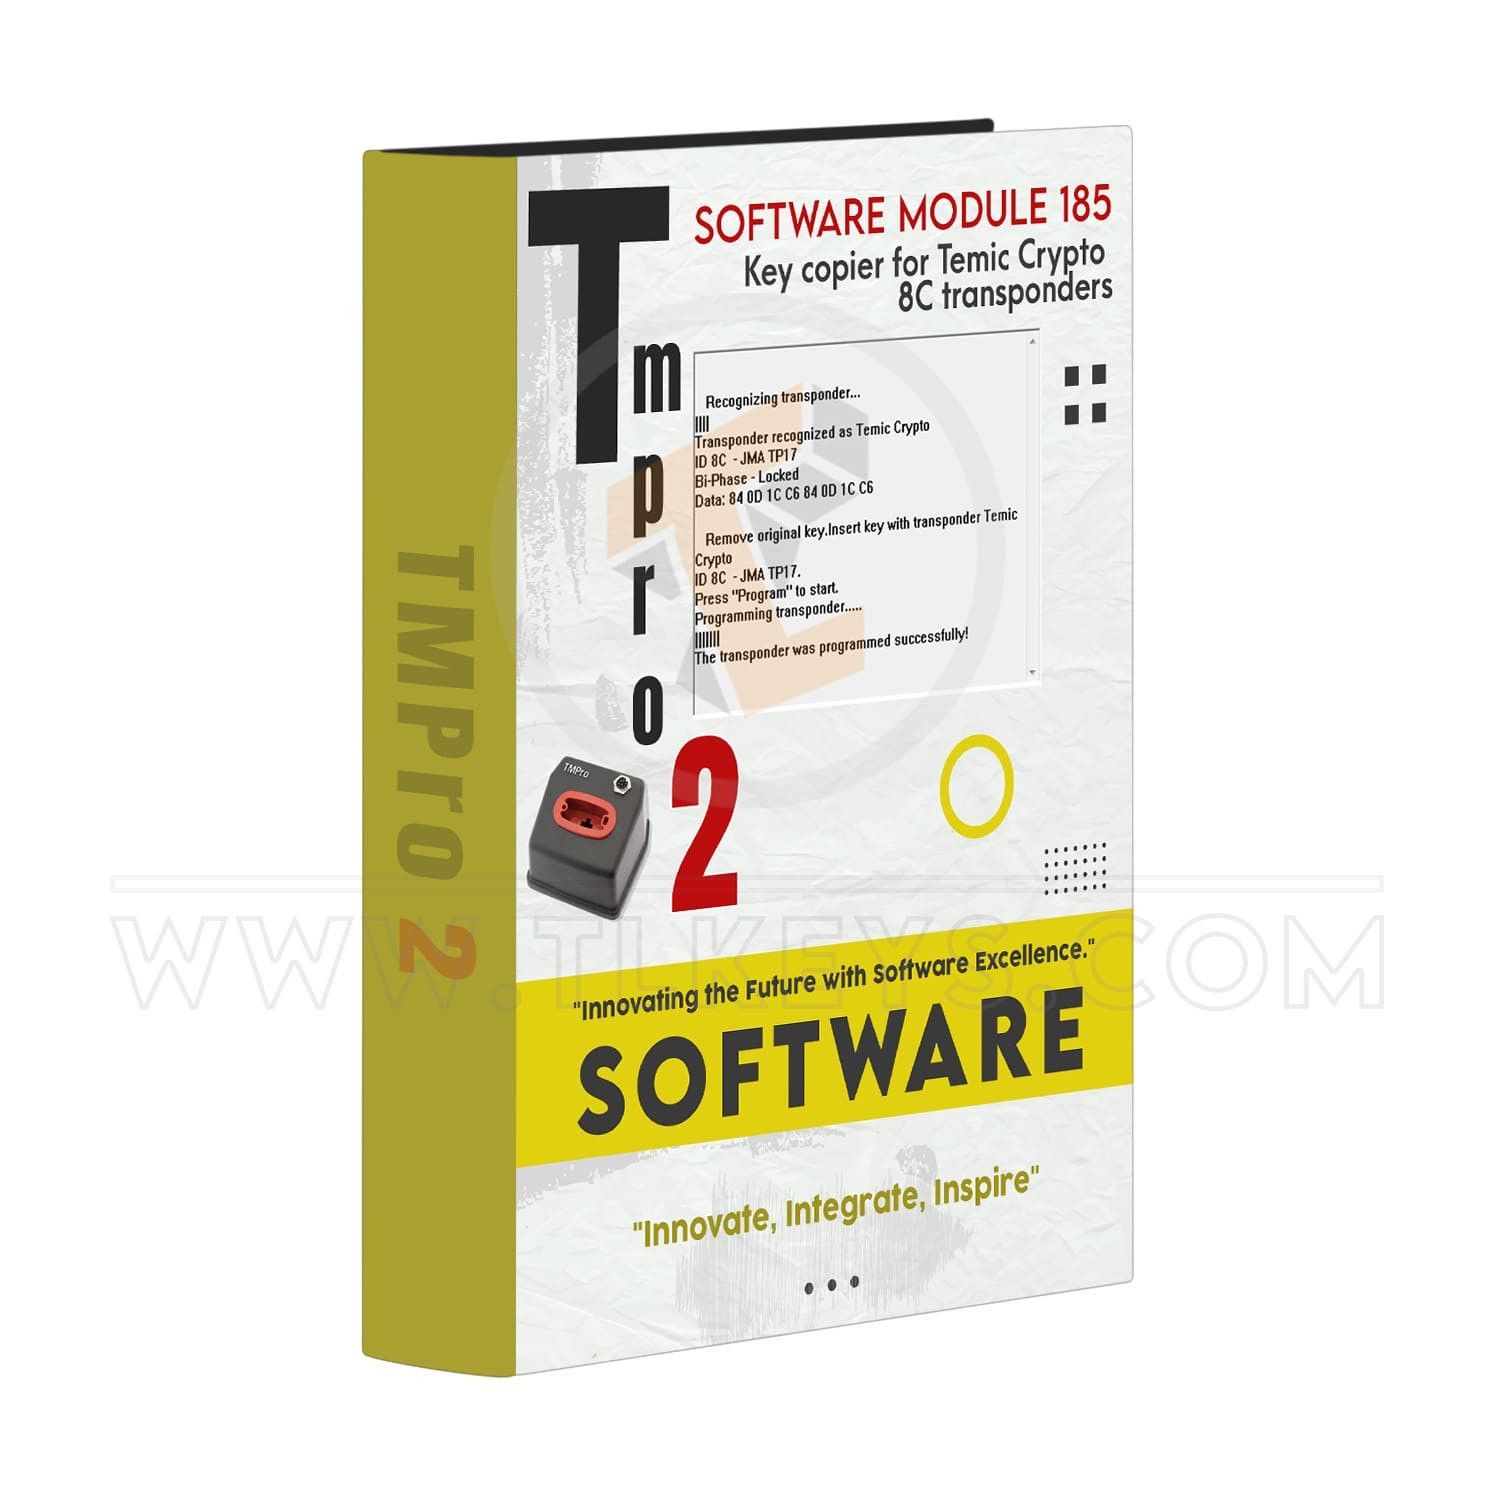 TMPRO Software module 185 – Key copier for Temic Crypto